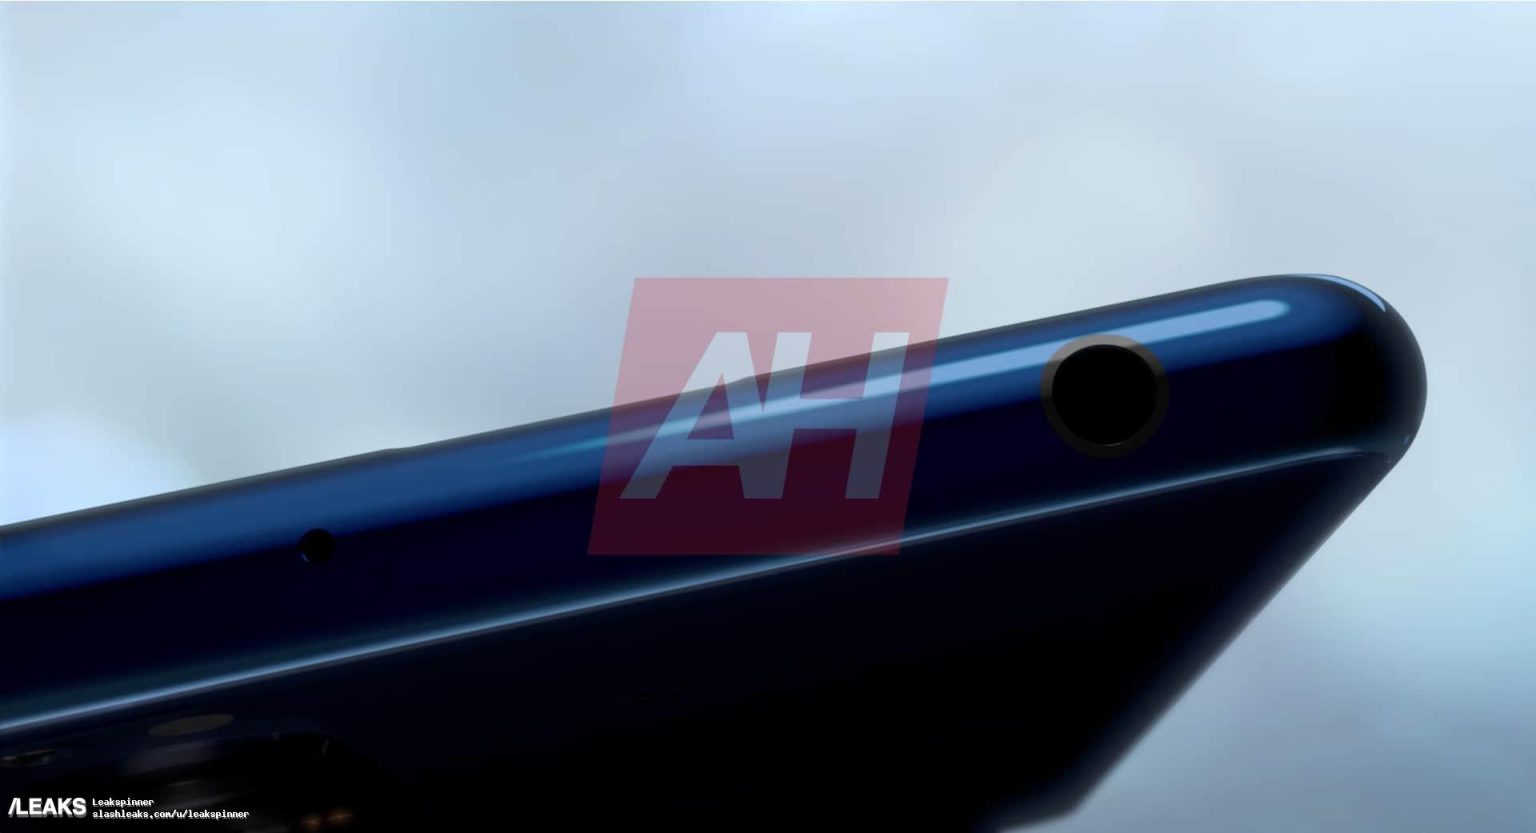 Sony Xperia 5 Ii Pictures And Specs Leaked.jpg